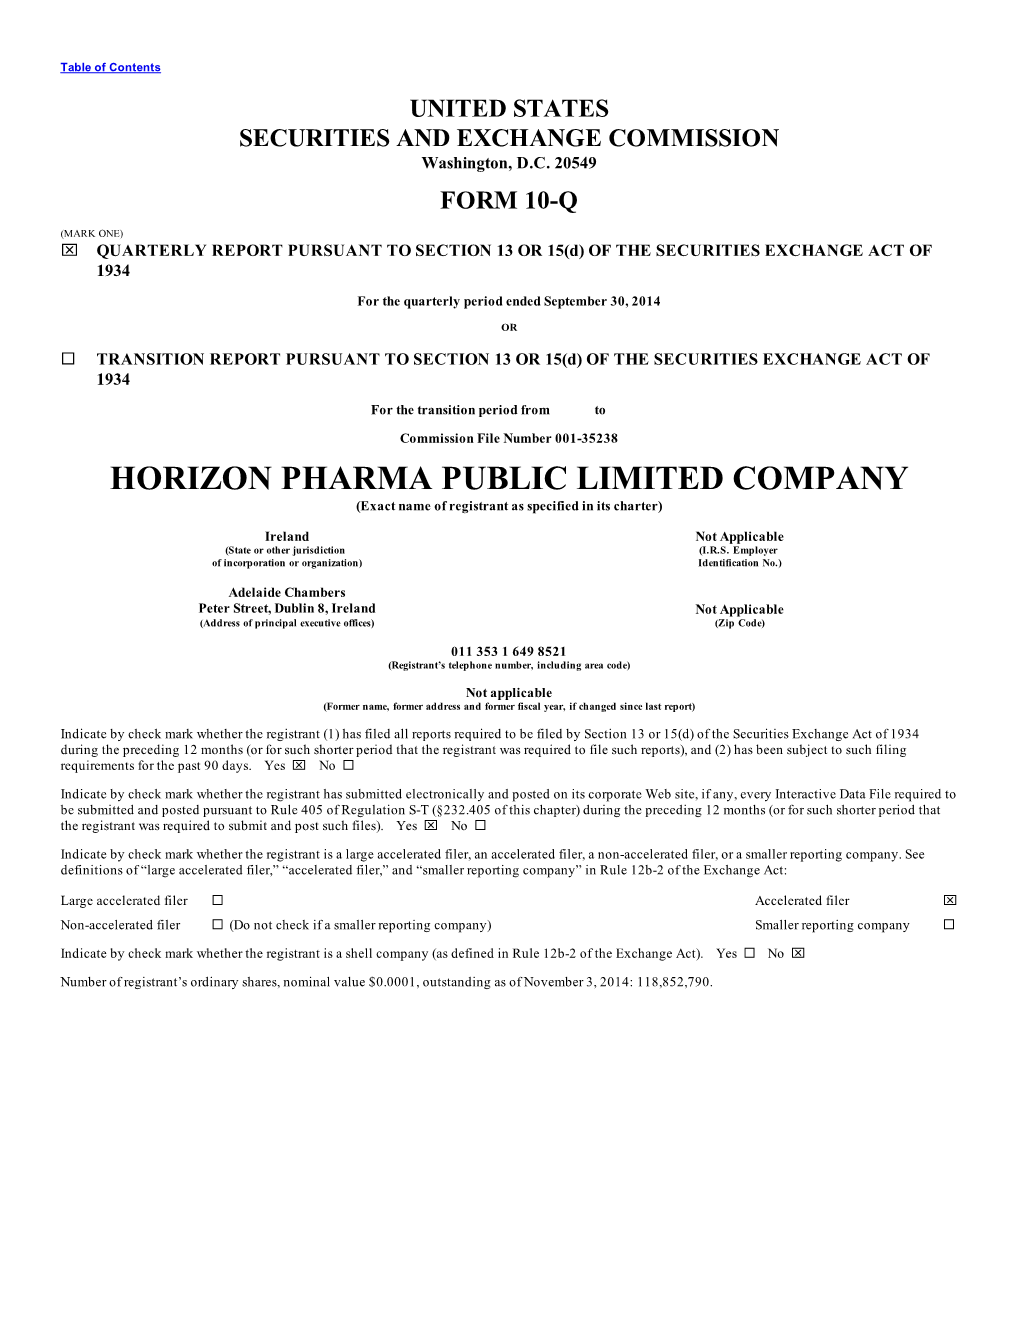 HORIZON PHARMA PUBLIC LIMITED COMPANY (Exact Name of Registrant As Specified in Its Charter)